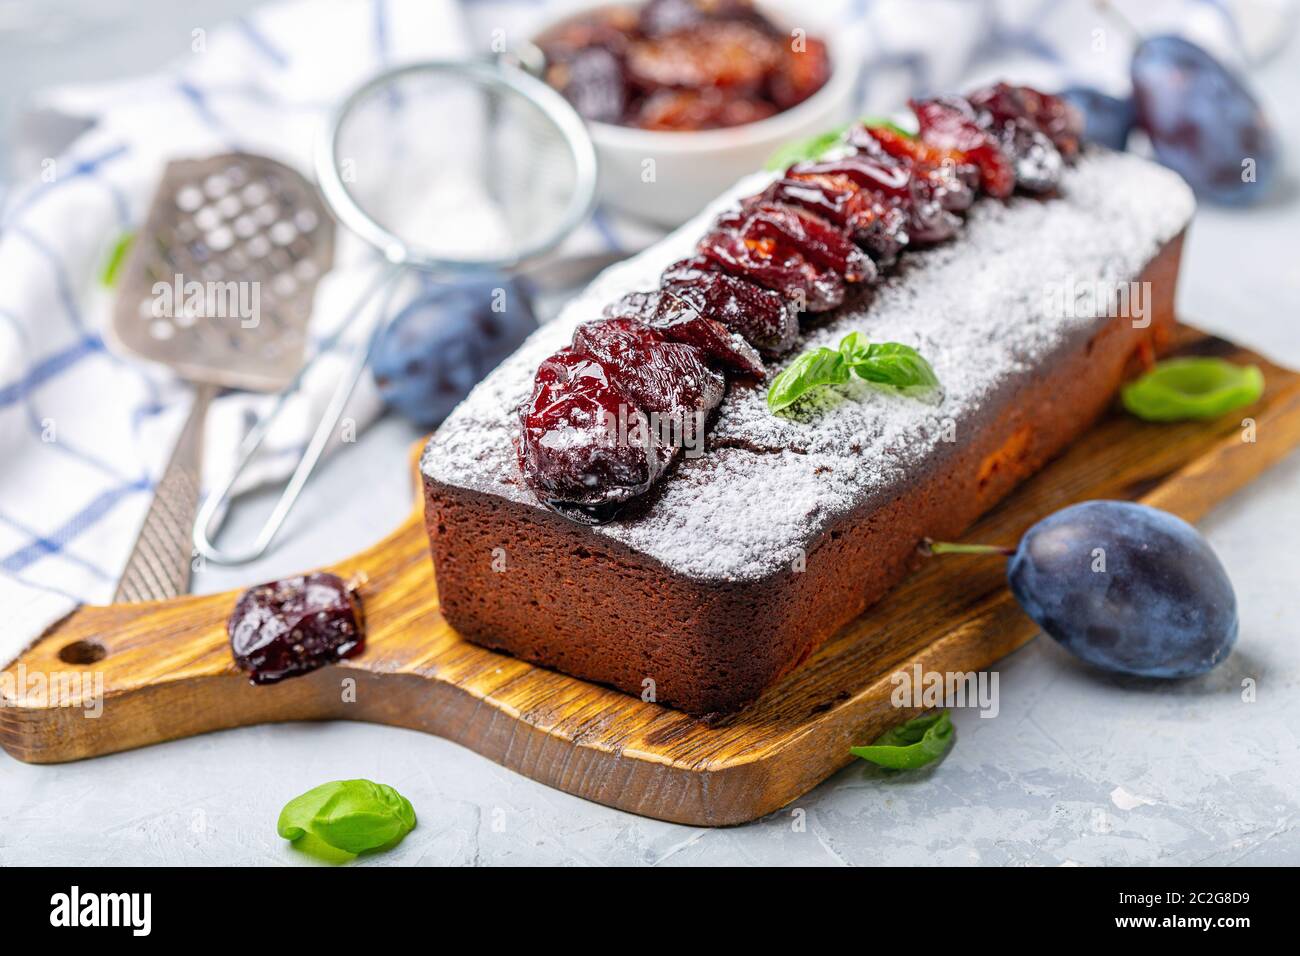 Cake with spiced plums. Stock Photo